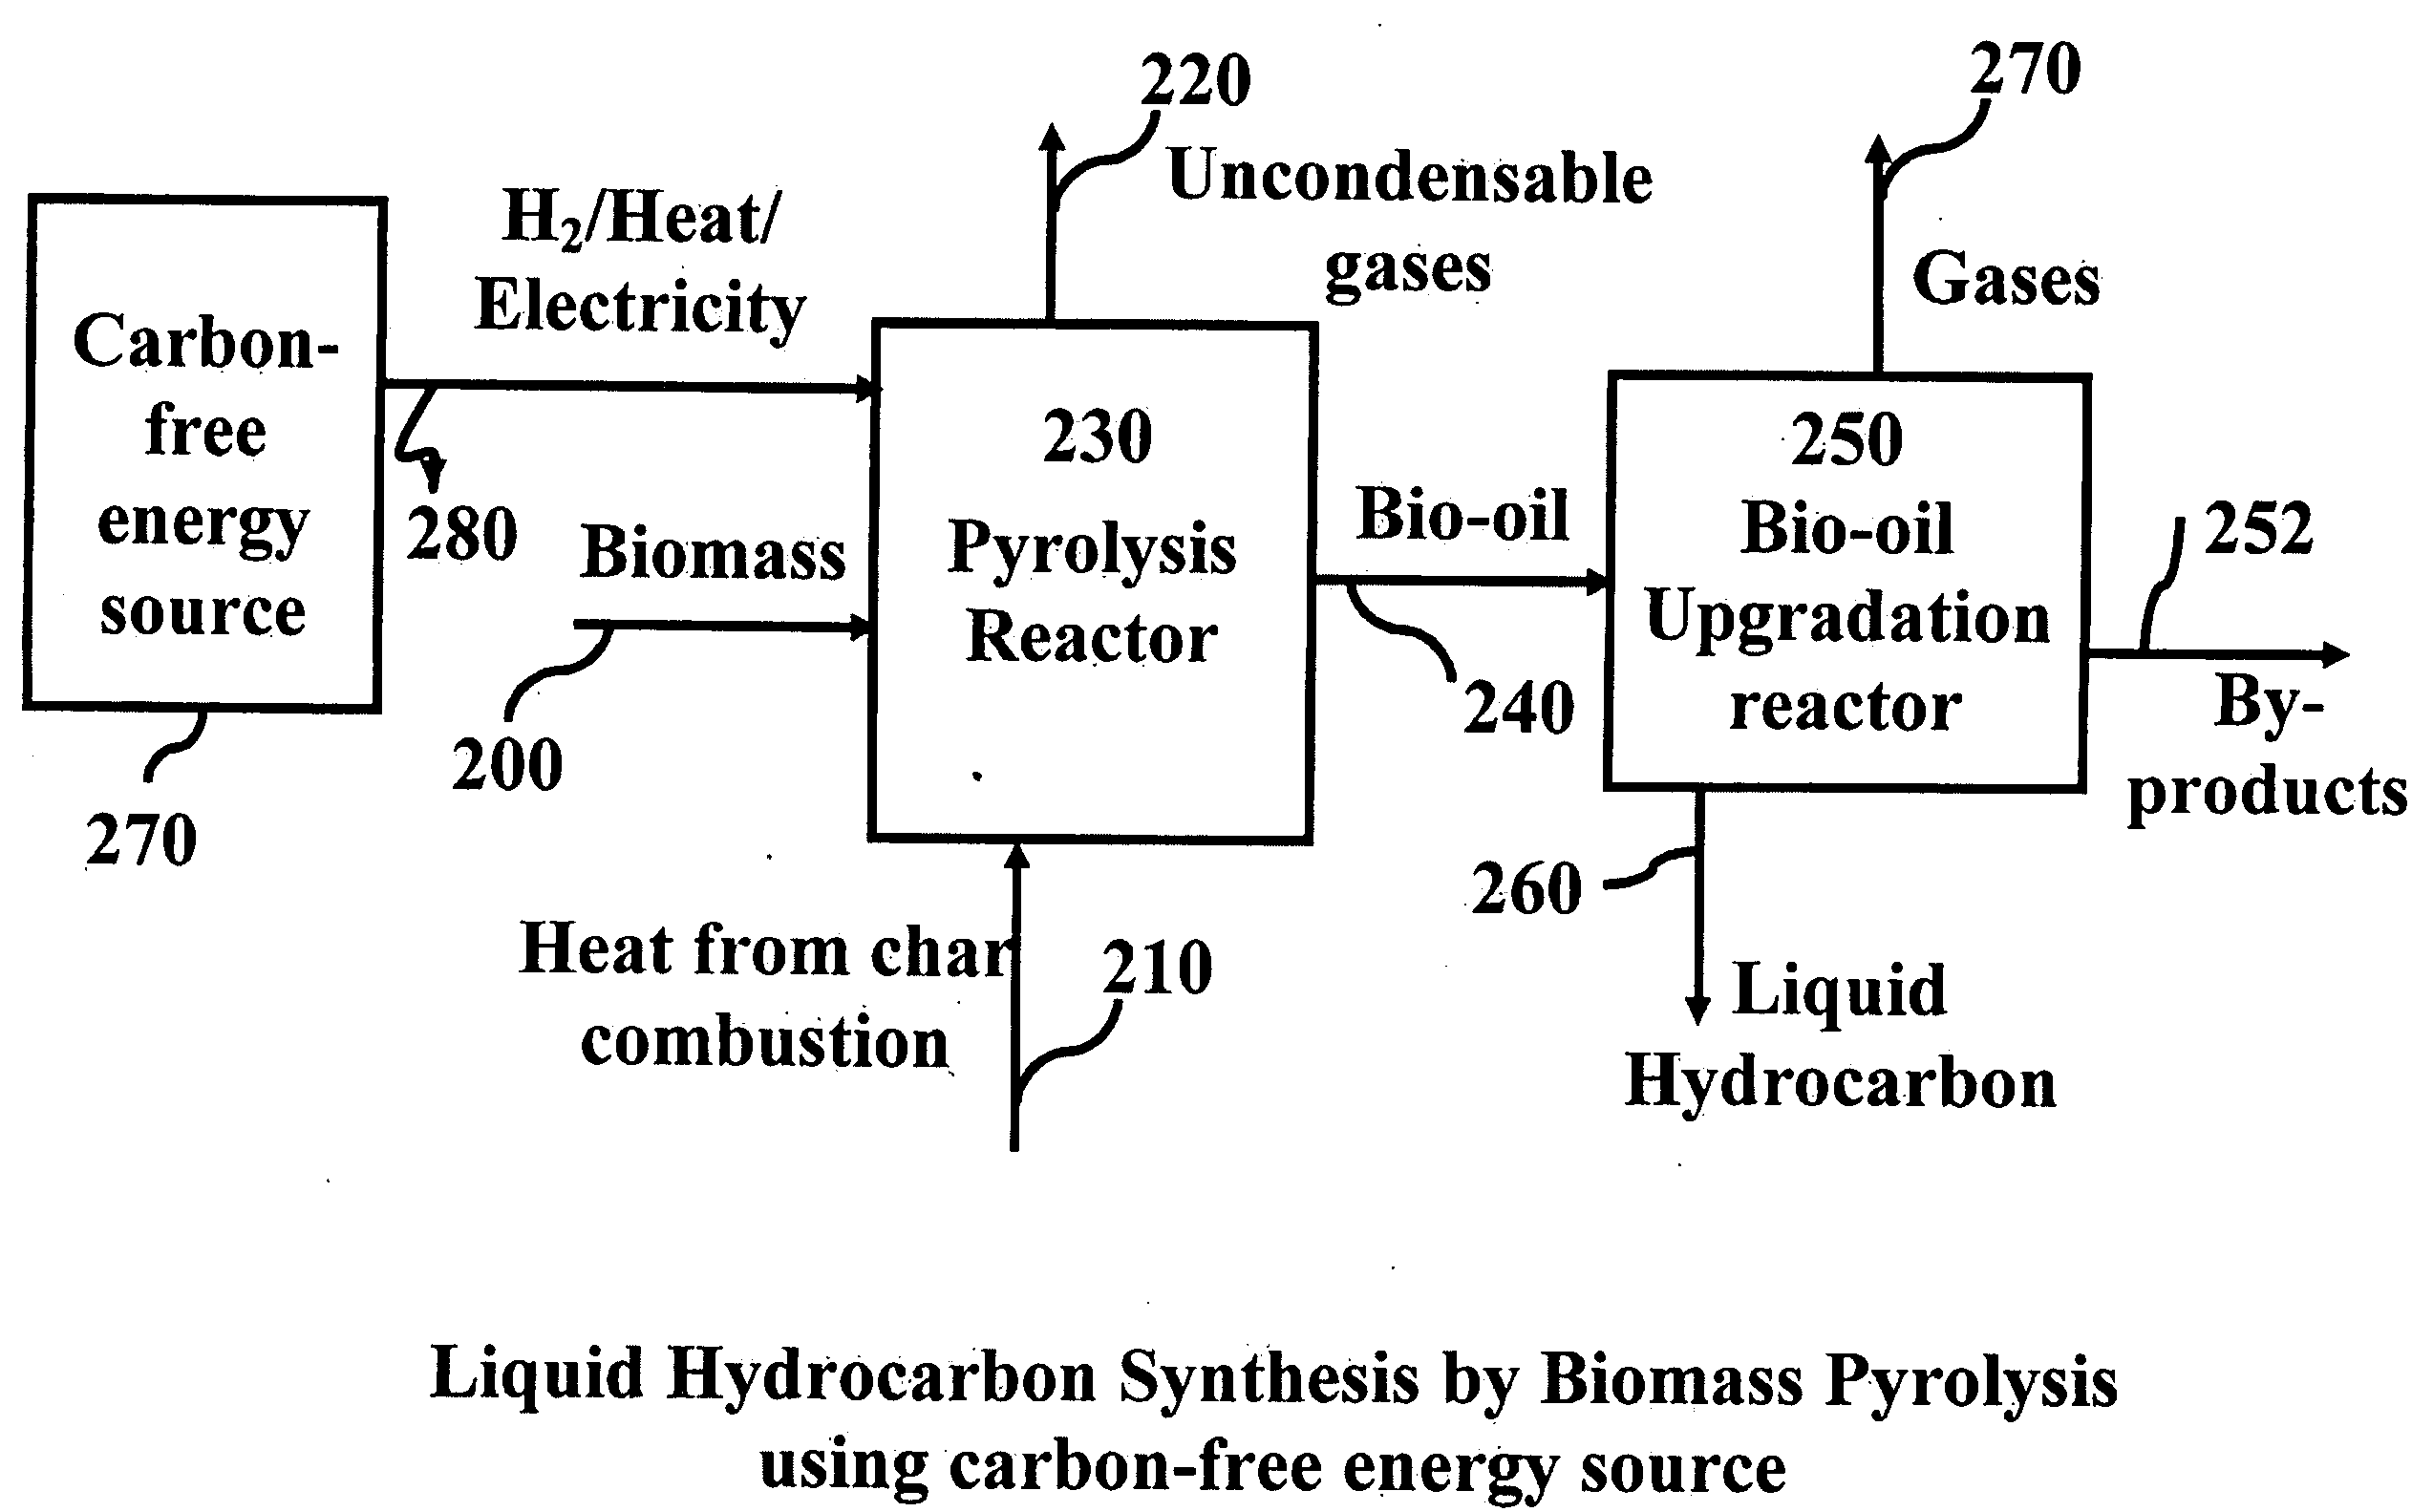 Novel process for producing liquid hydrocarbon by pyrolysis of biomass in presence of hydrogen from a carbon-free energy source